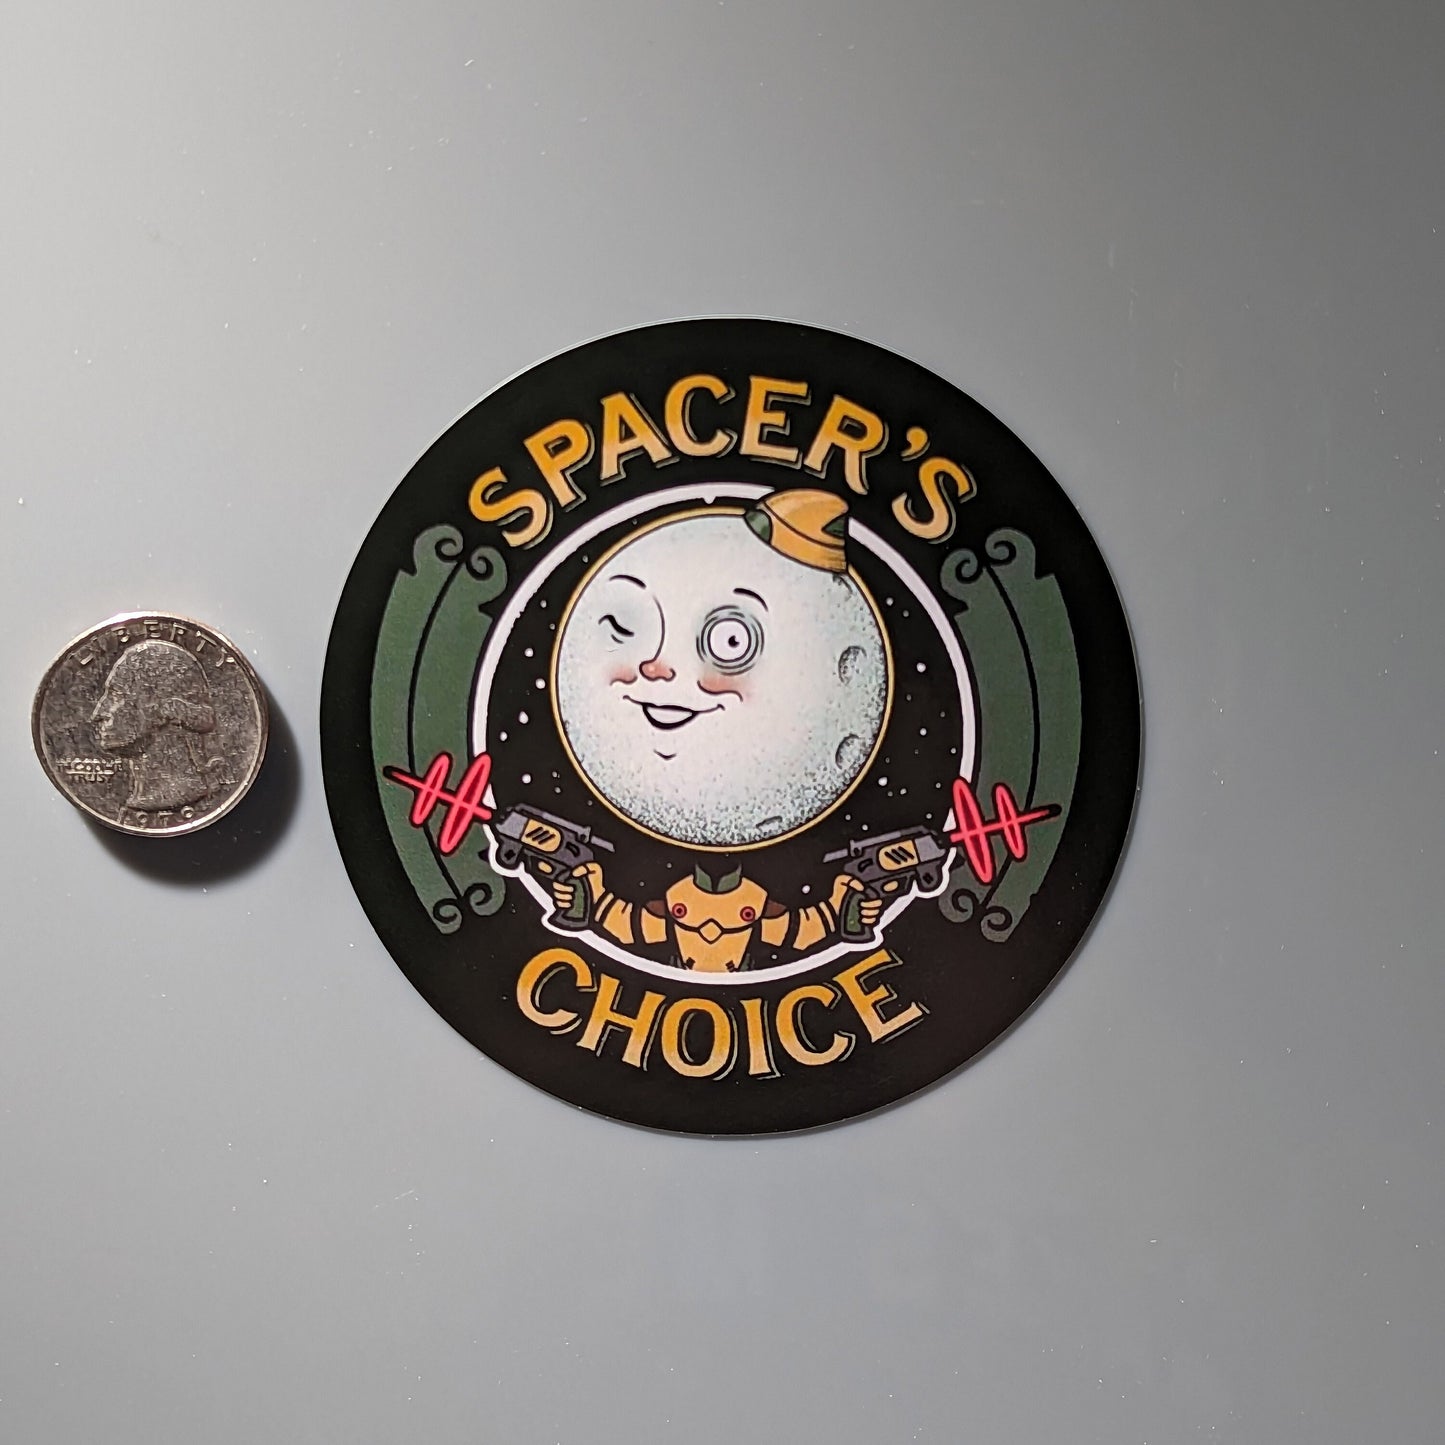 Spacer's Choice Decal